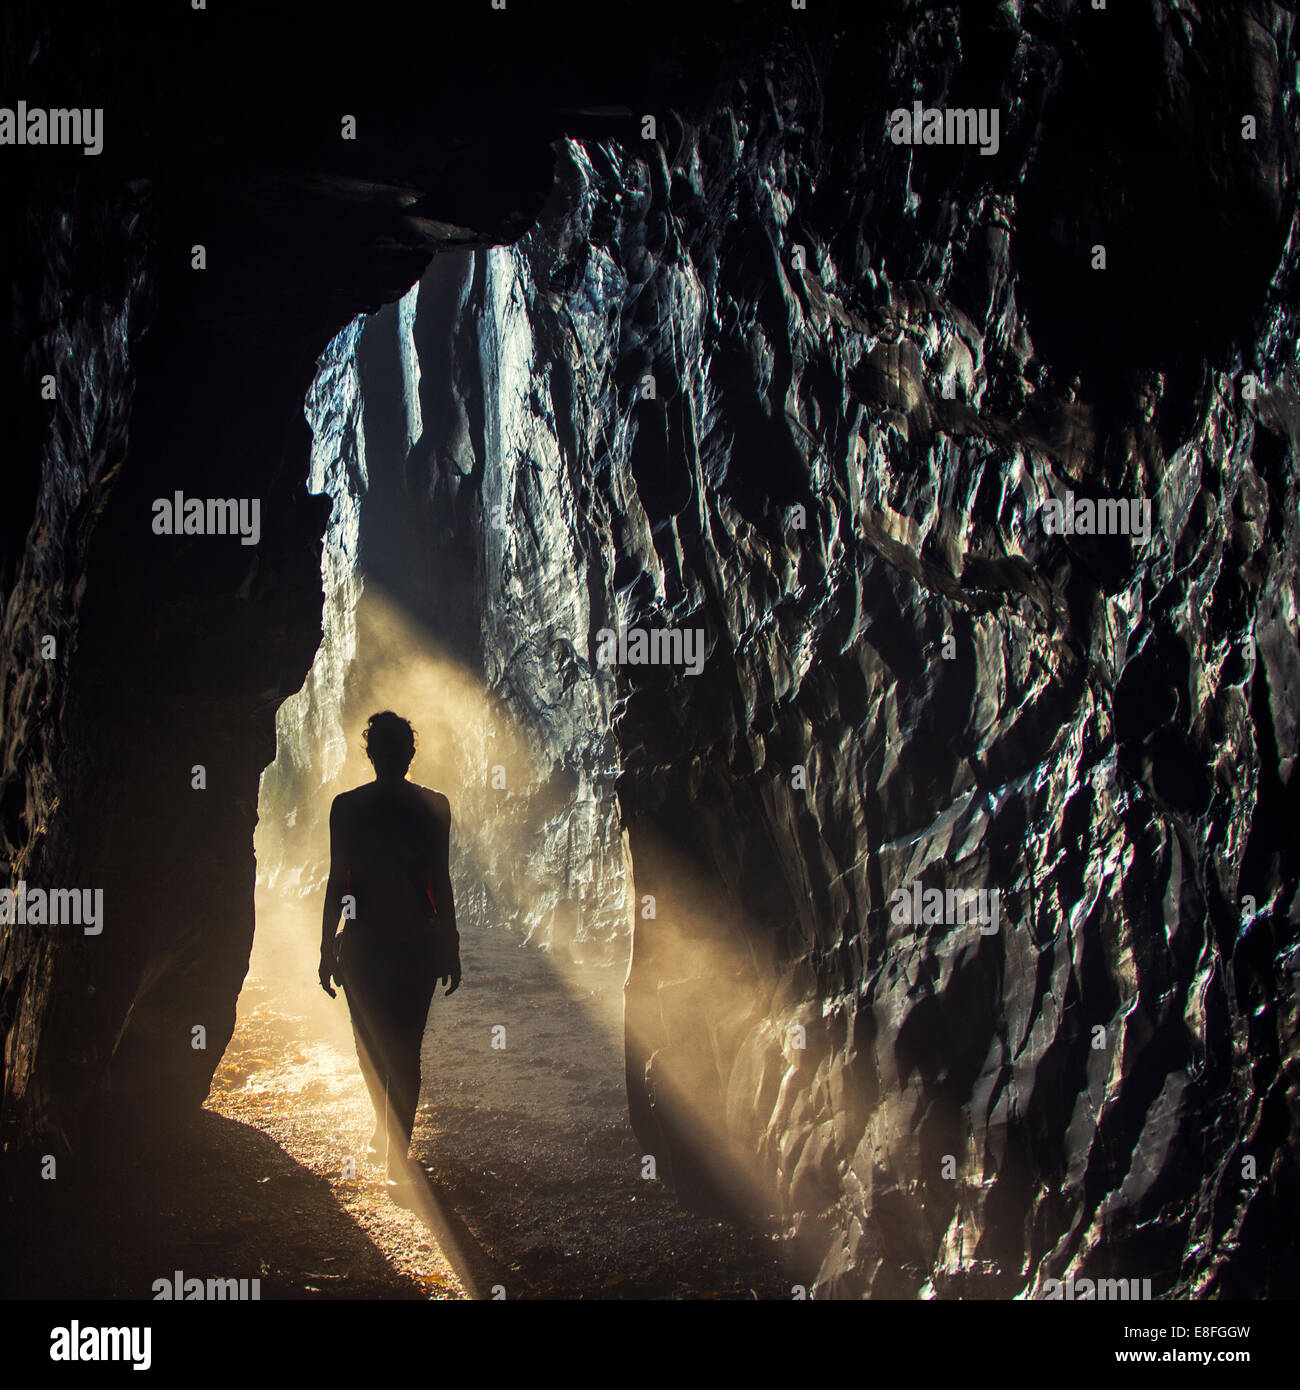 Silhouette of a woman walking into a cave Stock Photo